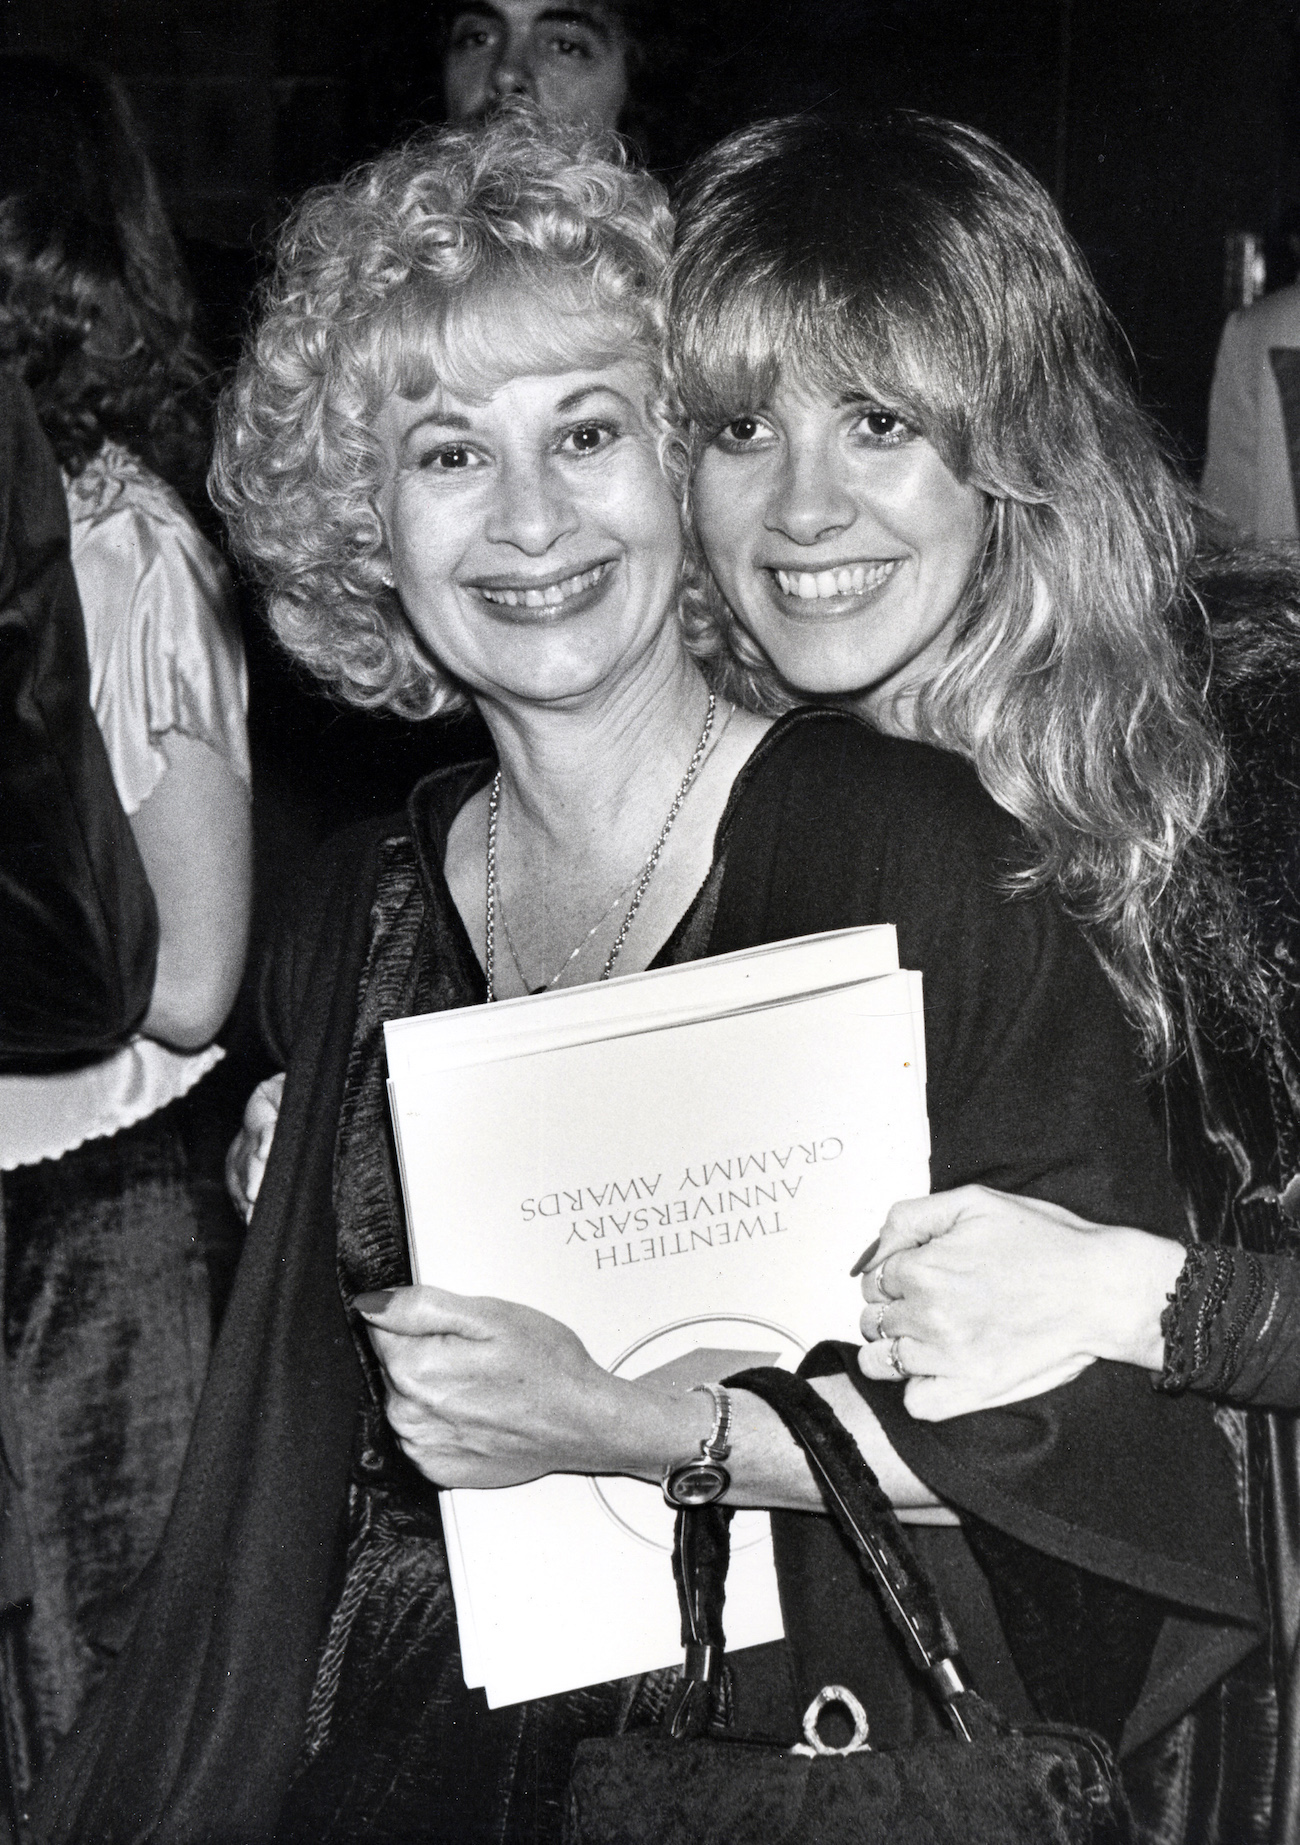 Stevie Nicks and her mother, Barbara Nicks, at the 1978 Grammys.